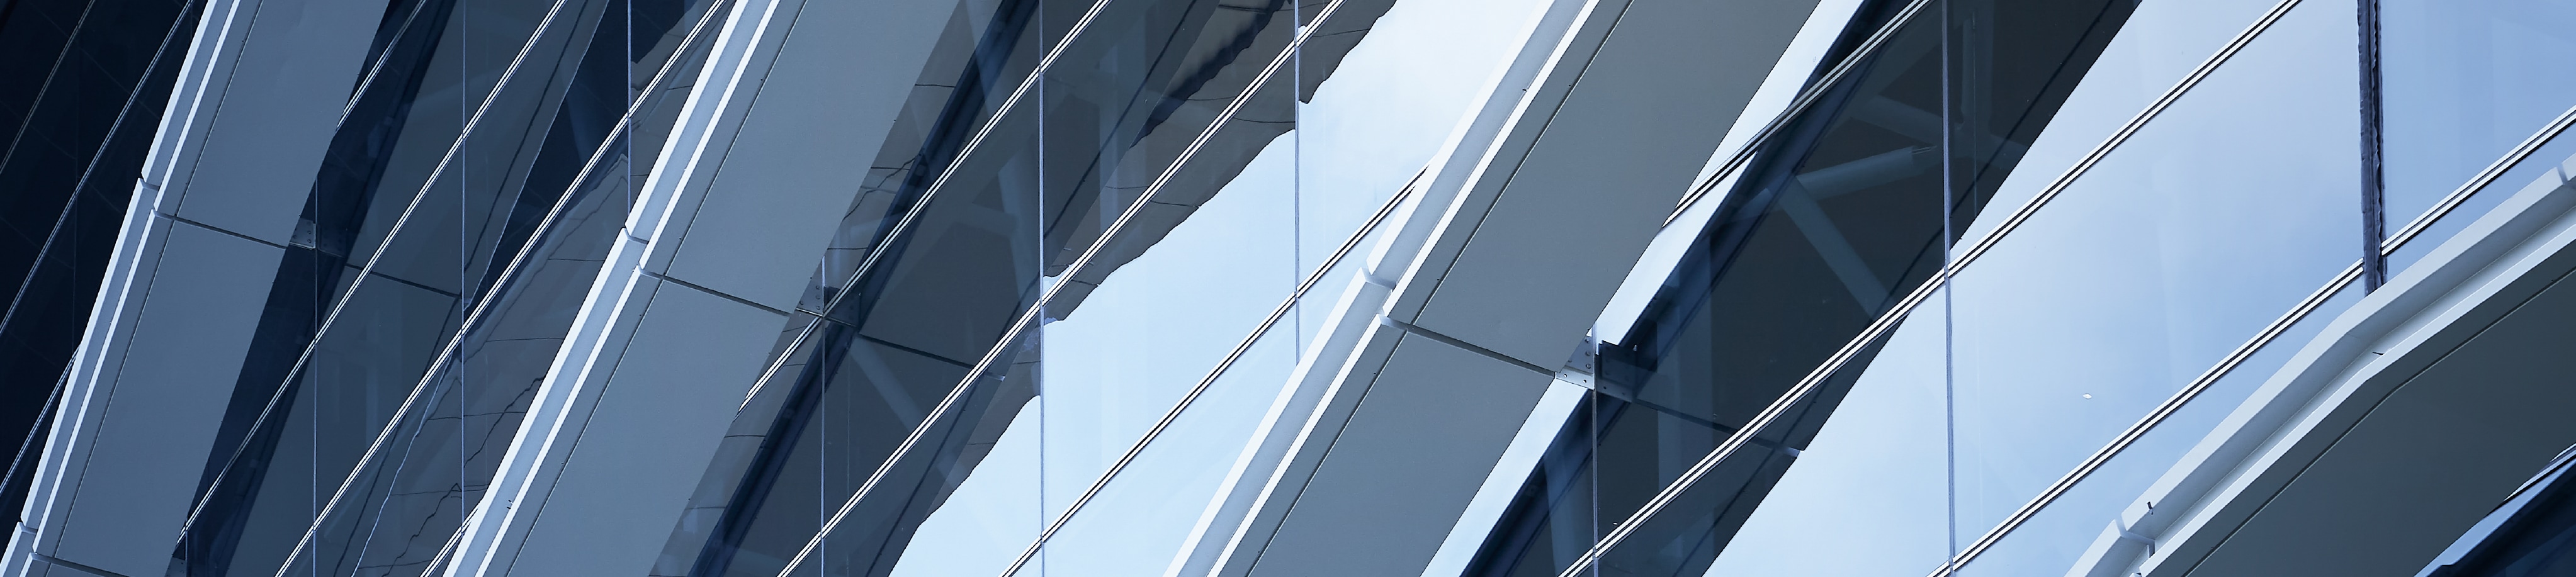 Close up of a windowed surface on a modern but industrial-looking building